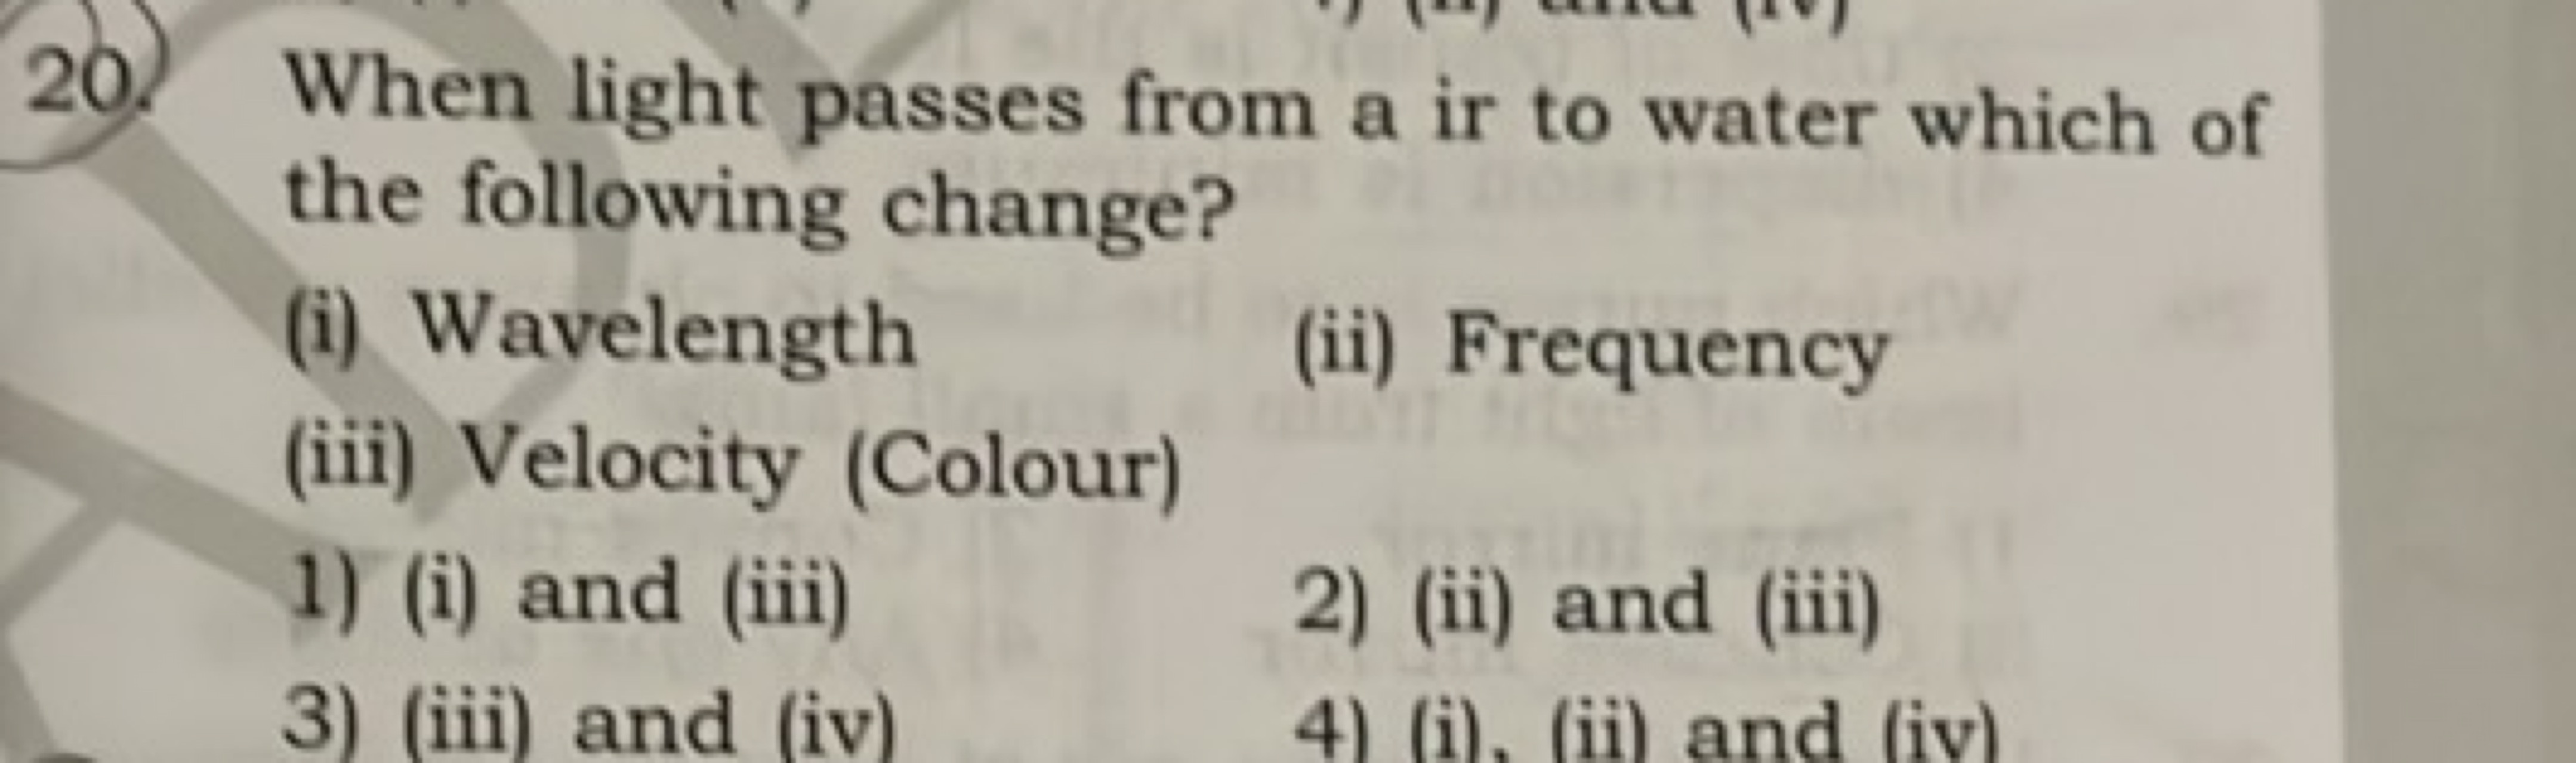 When light passes from a ir to water which of the following change? (i